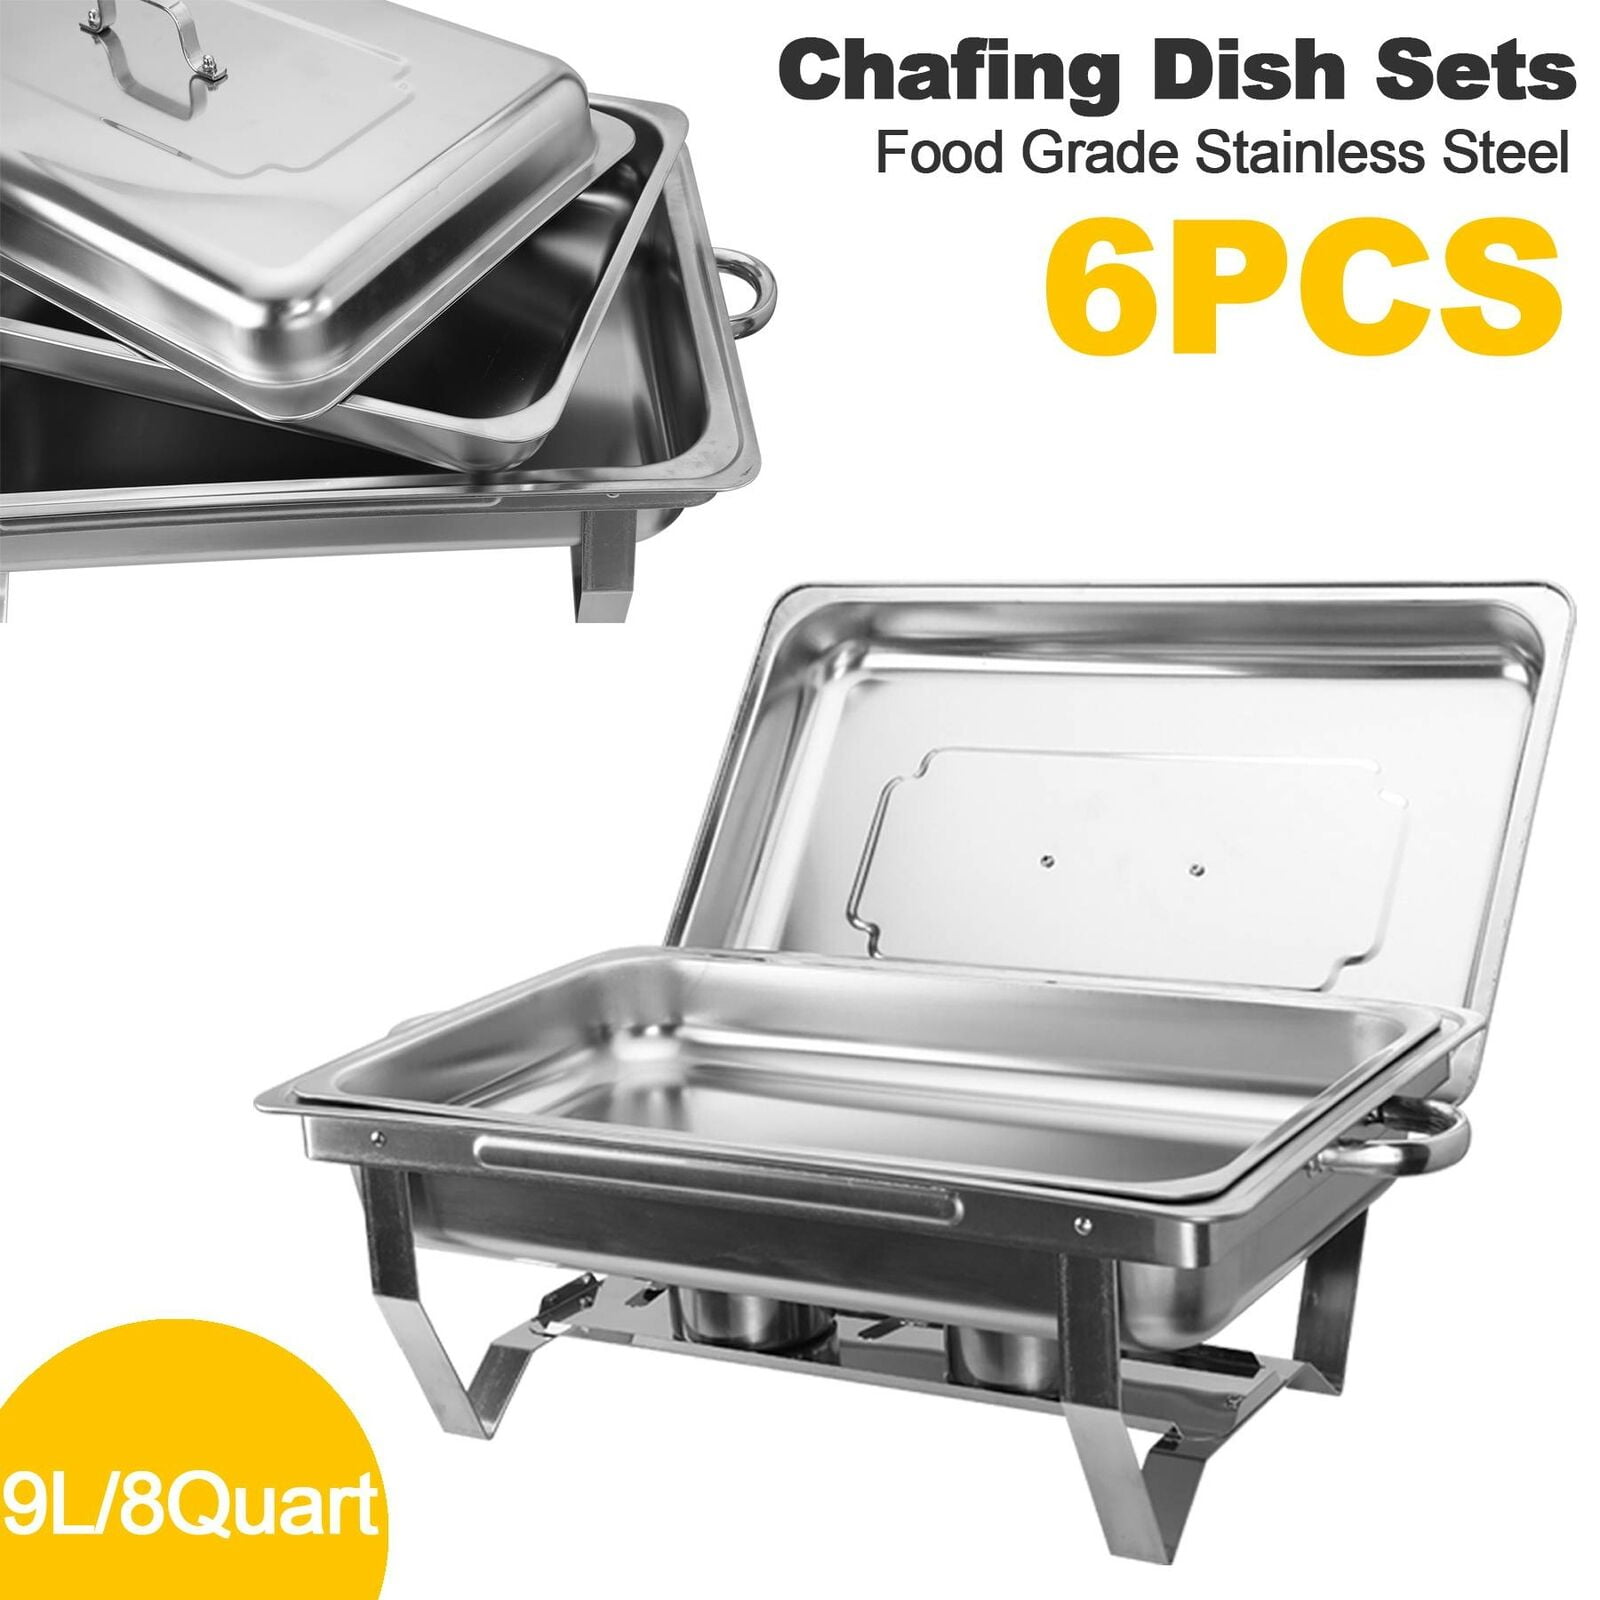 1 Pack Catering Stainless Steel Chafer Chafing Dish Sets 9.5QT For Hotel Party 